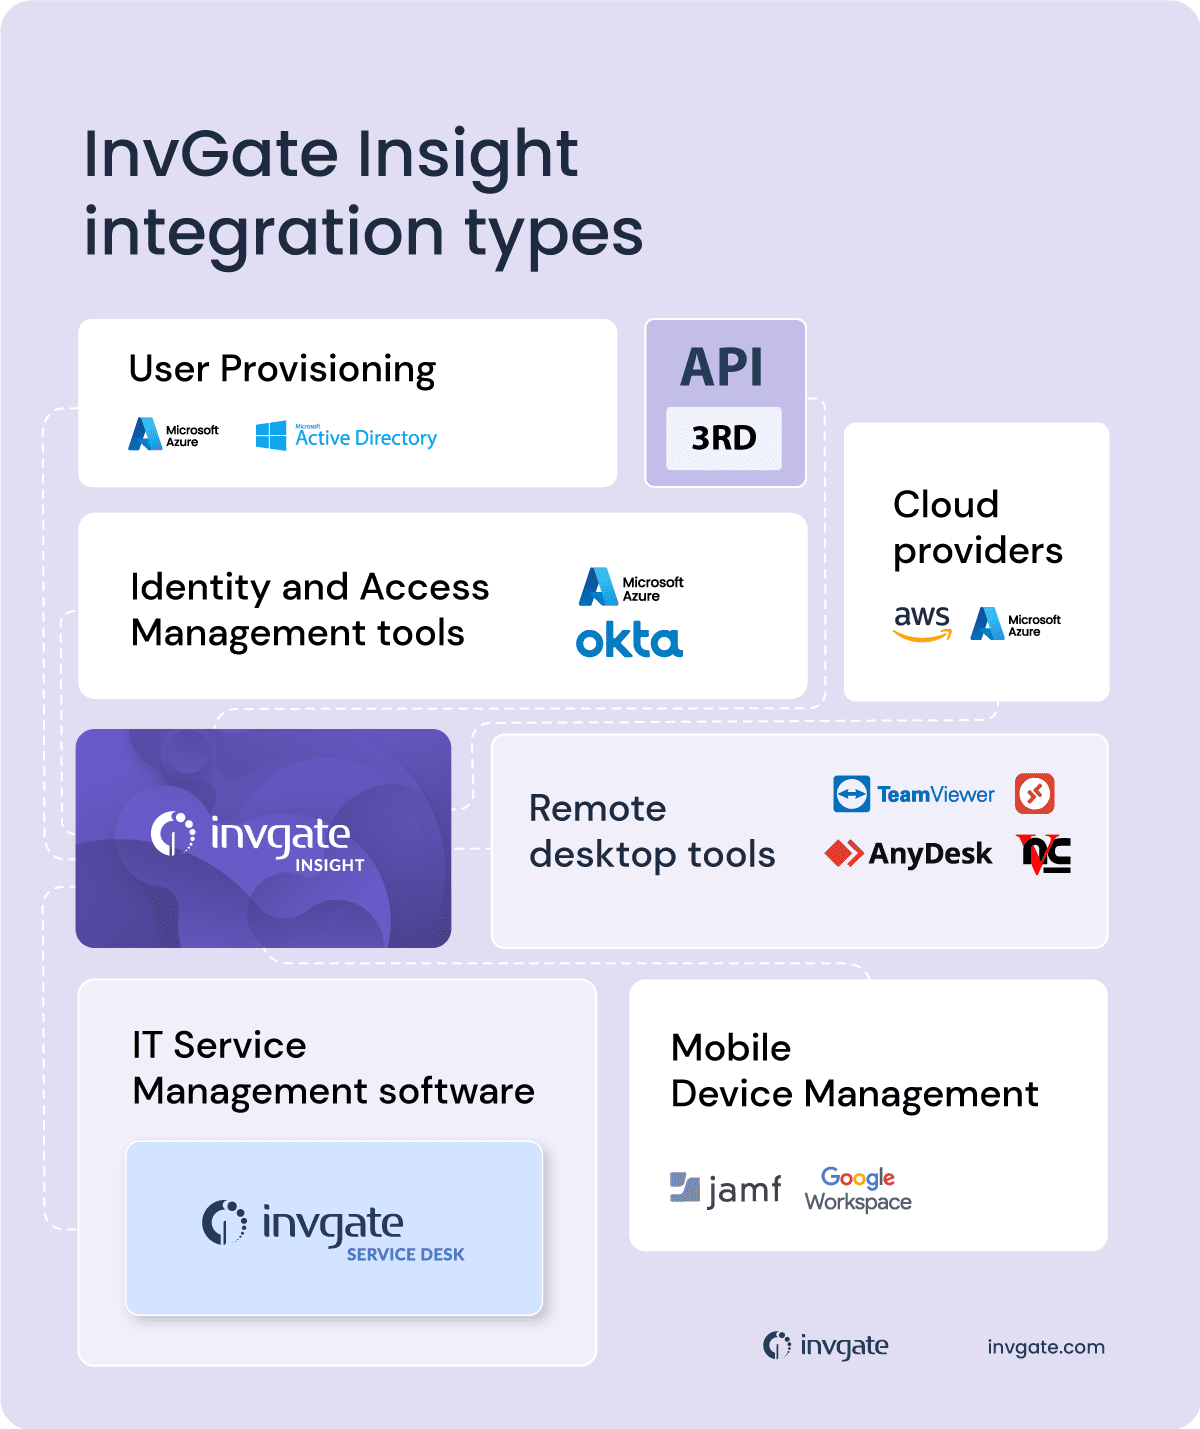 invgate-insight-integrations-types-1